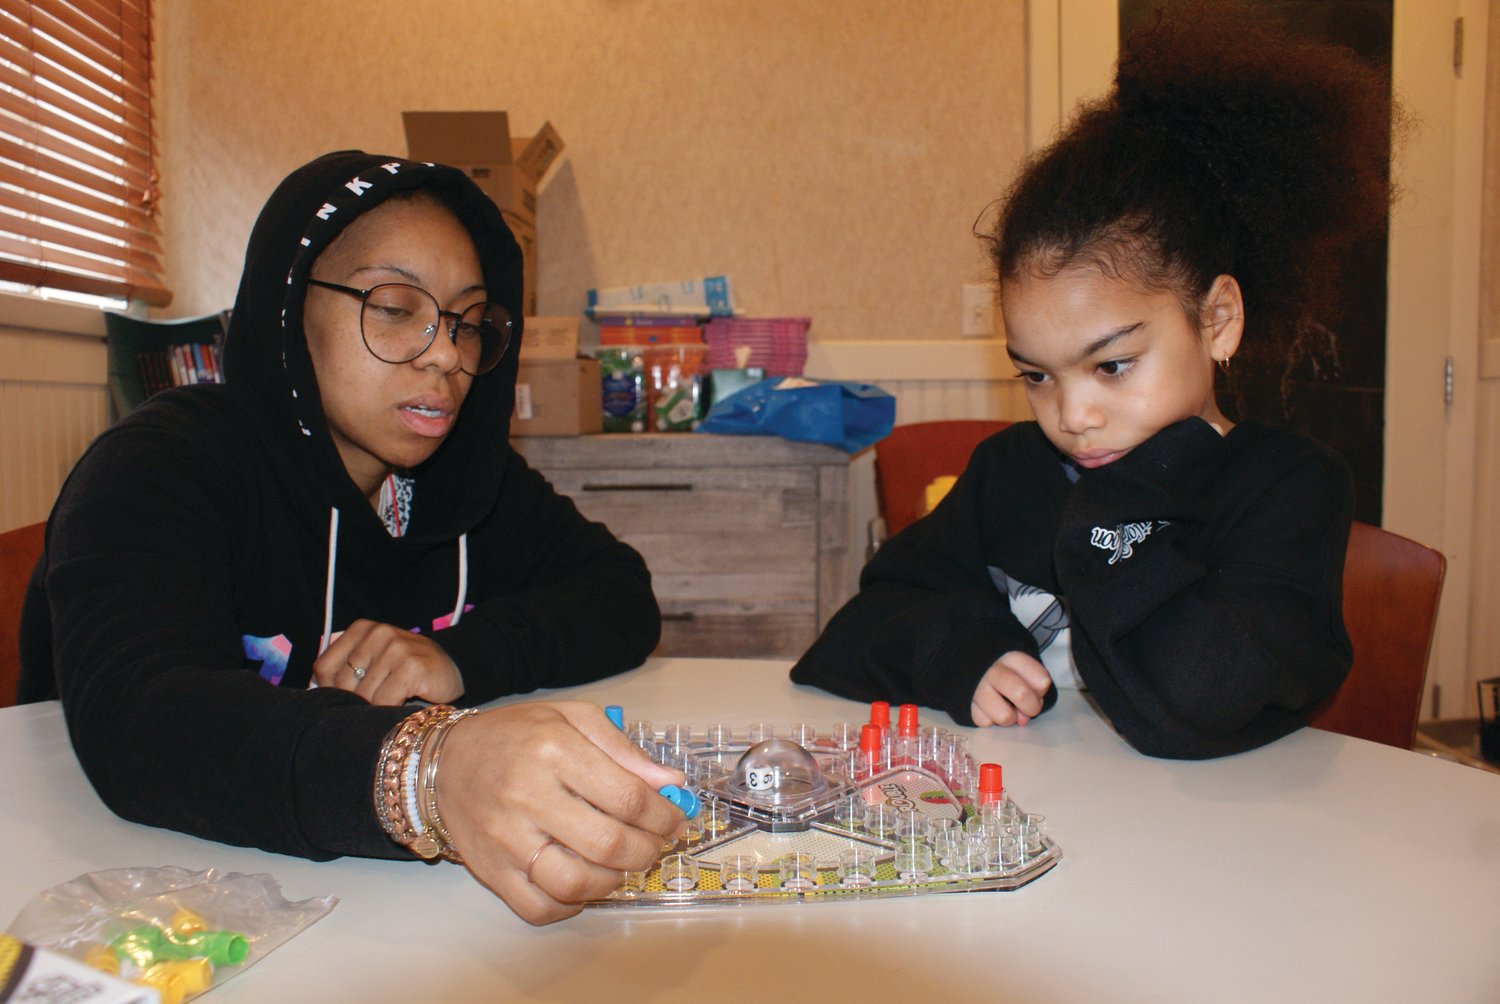 A ROUND OF TROUBLE: Whitney Wilborn and Jeena Lim, 8, enjoy a mother-daughter day out. The two eyed the game Trouble at the Huddle Center and just had to play.